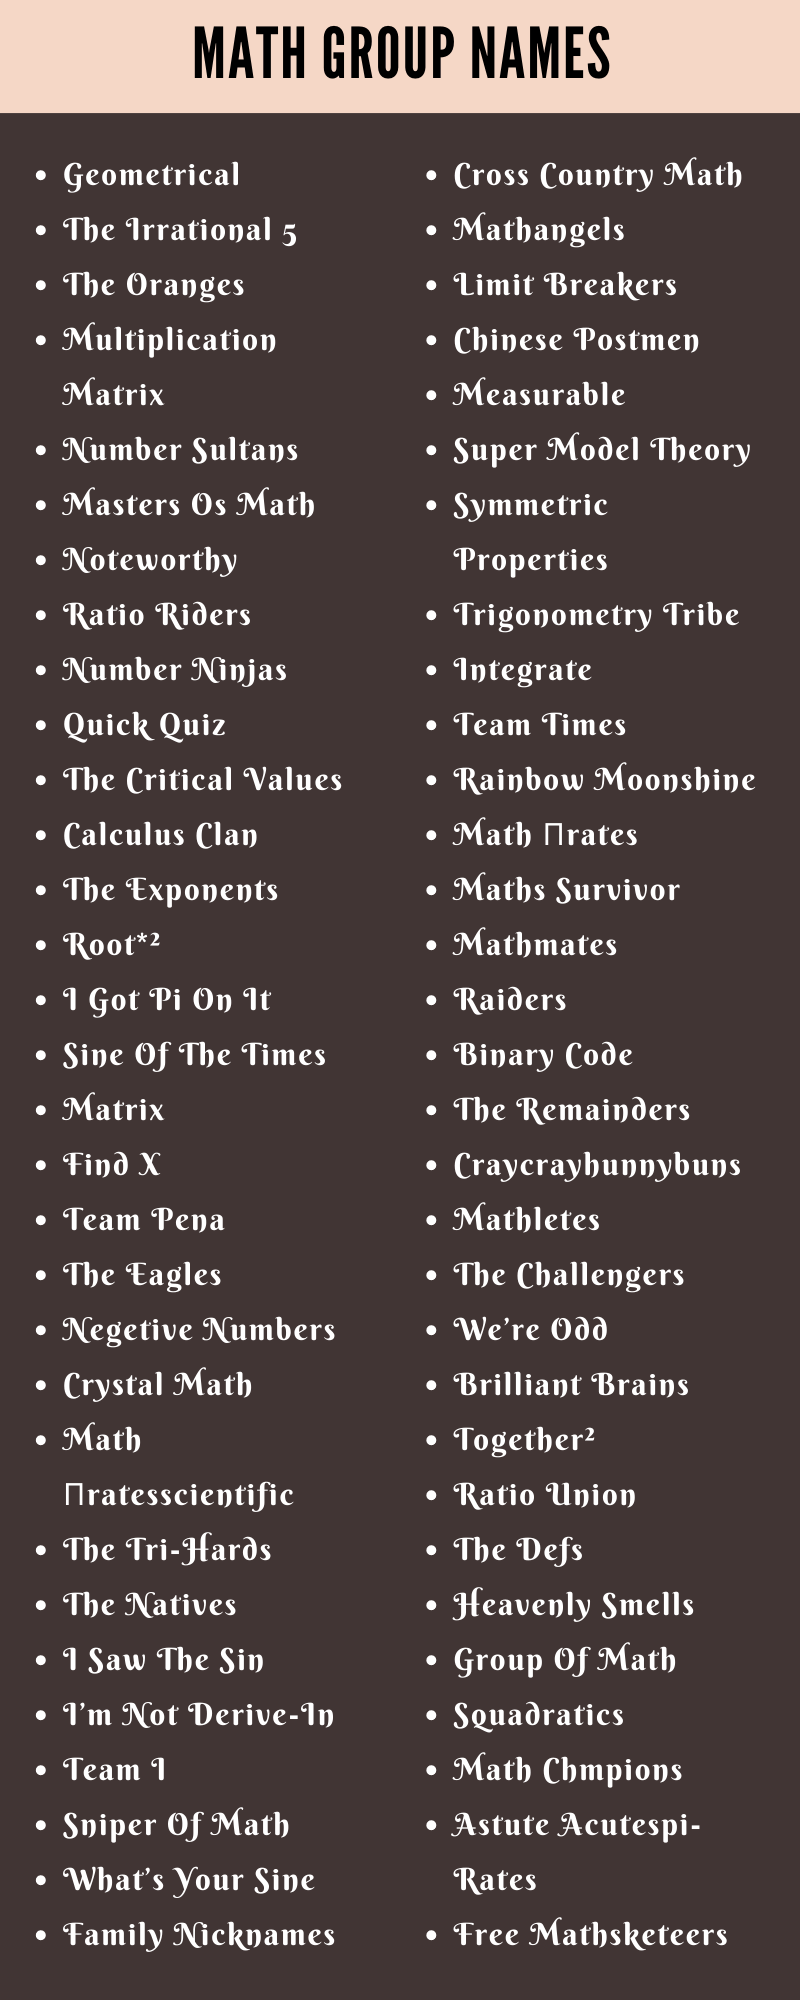 400 Cool Math Group Names Ideas and Suggestions